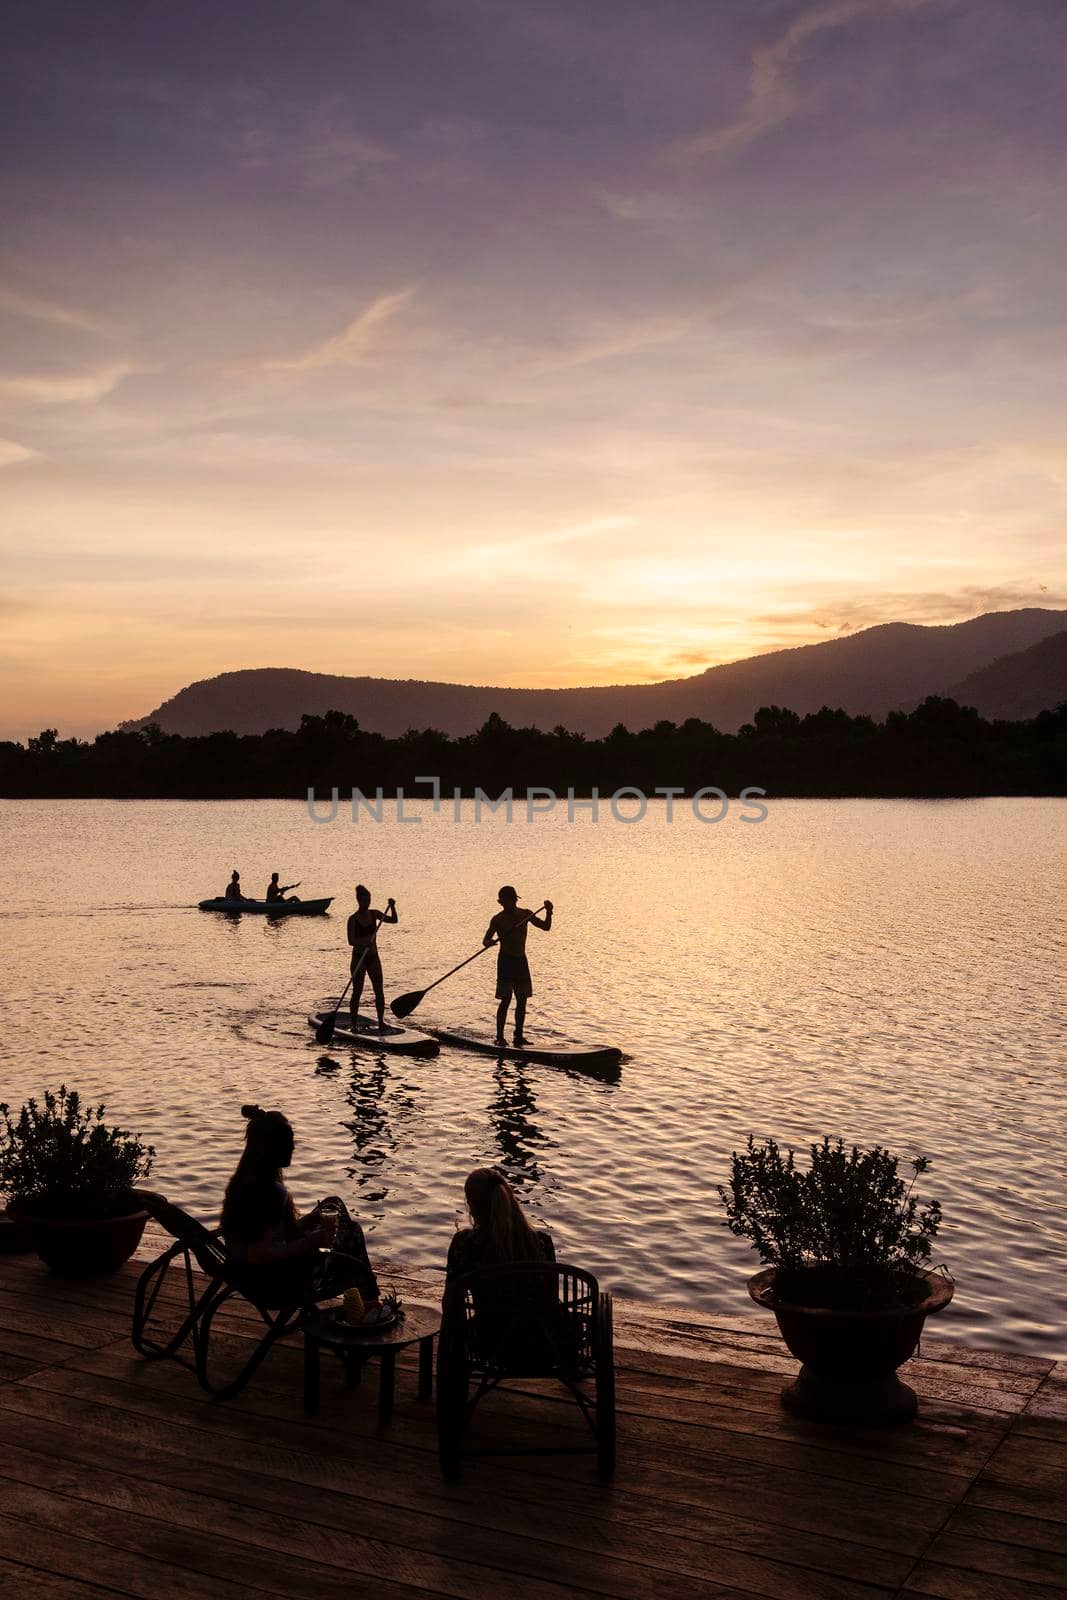 kampot river view in cambodia with SUP stand up paddle boarding tourists at sunset